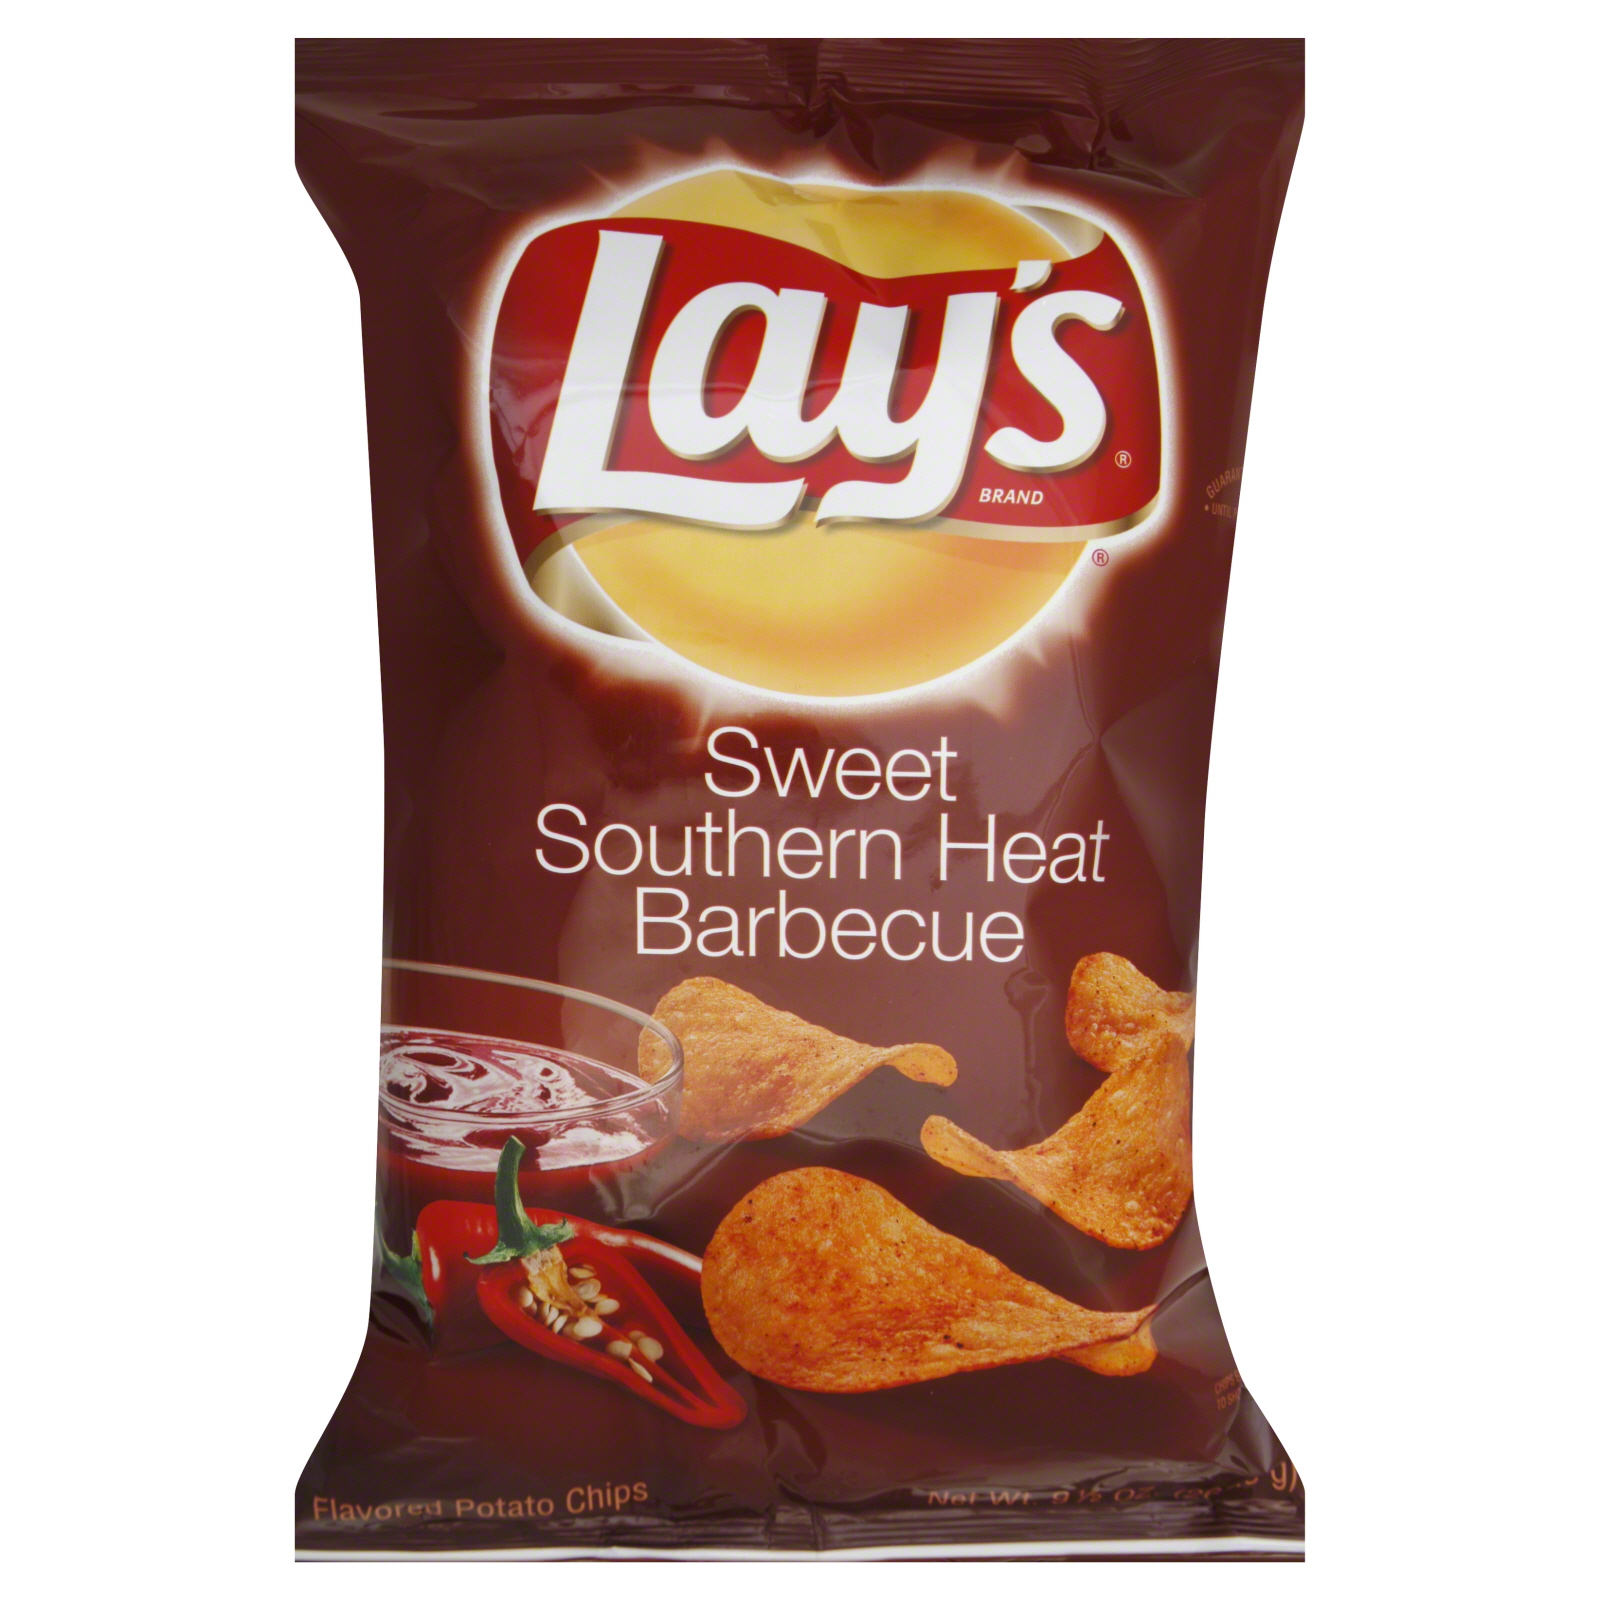 Lay's Sweet Southern Heat Barbecue Flavored Potato Chips, 9.5 oz (269.3 g)